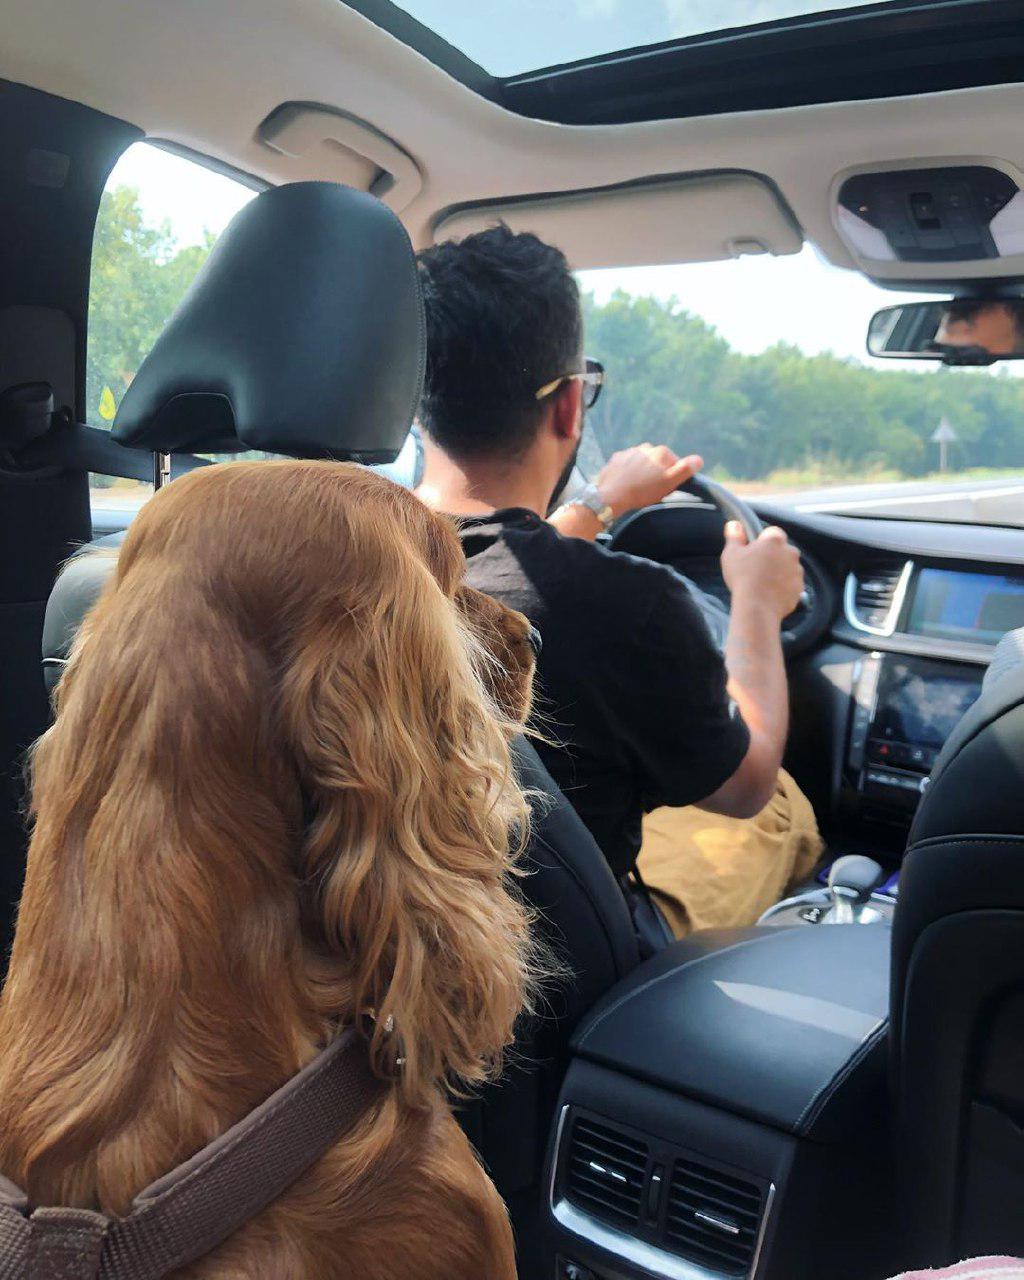 A Cocker Spaniel sitting in the backseat behind the driver